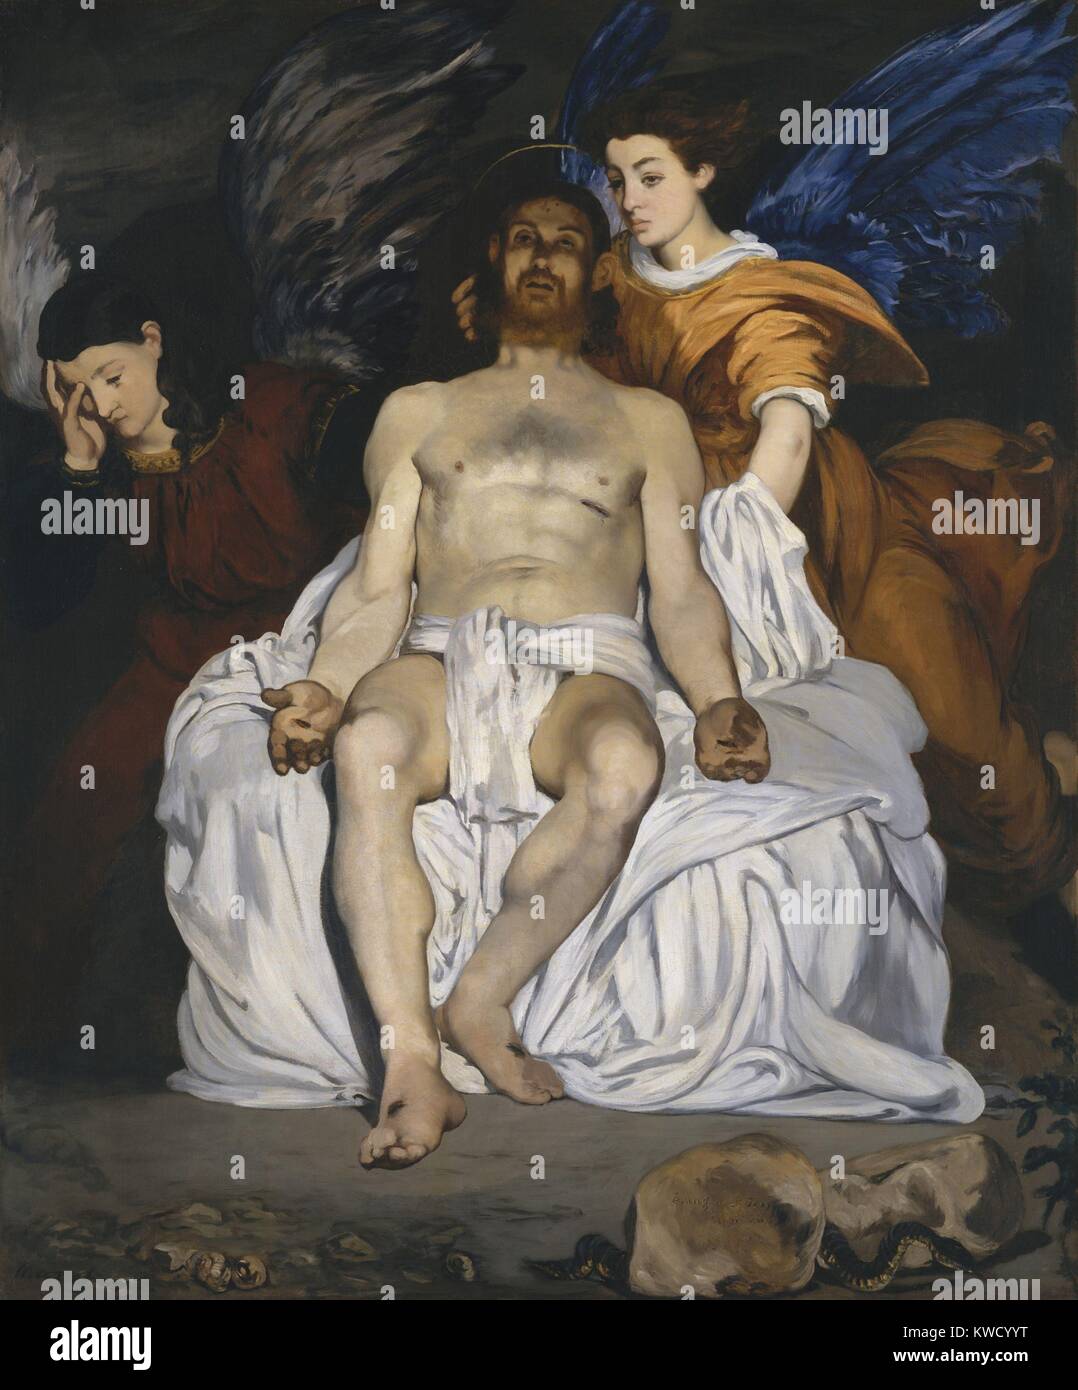 The Dead Christ with Angels, by Edouard Manet, 1864, French impressionist painting, oil on canvas (BSLOC 2017 3 6) Stock Photo